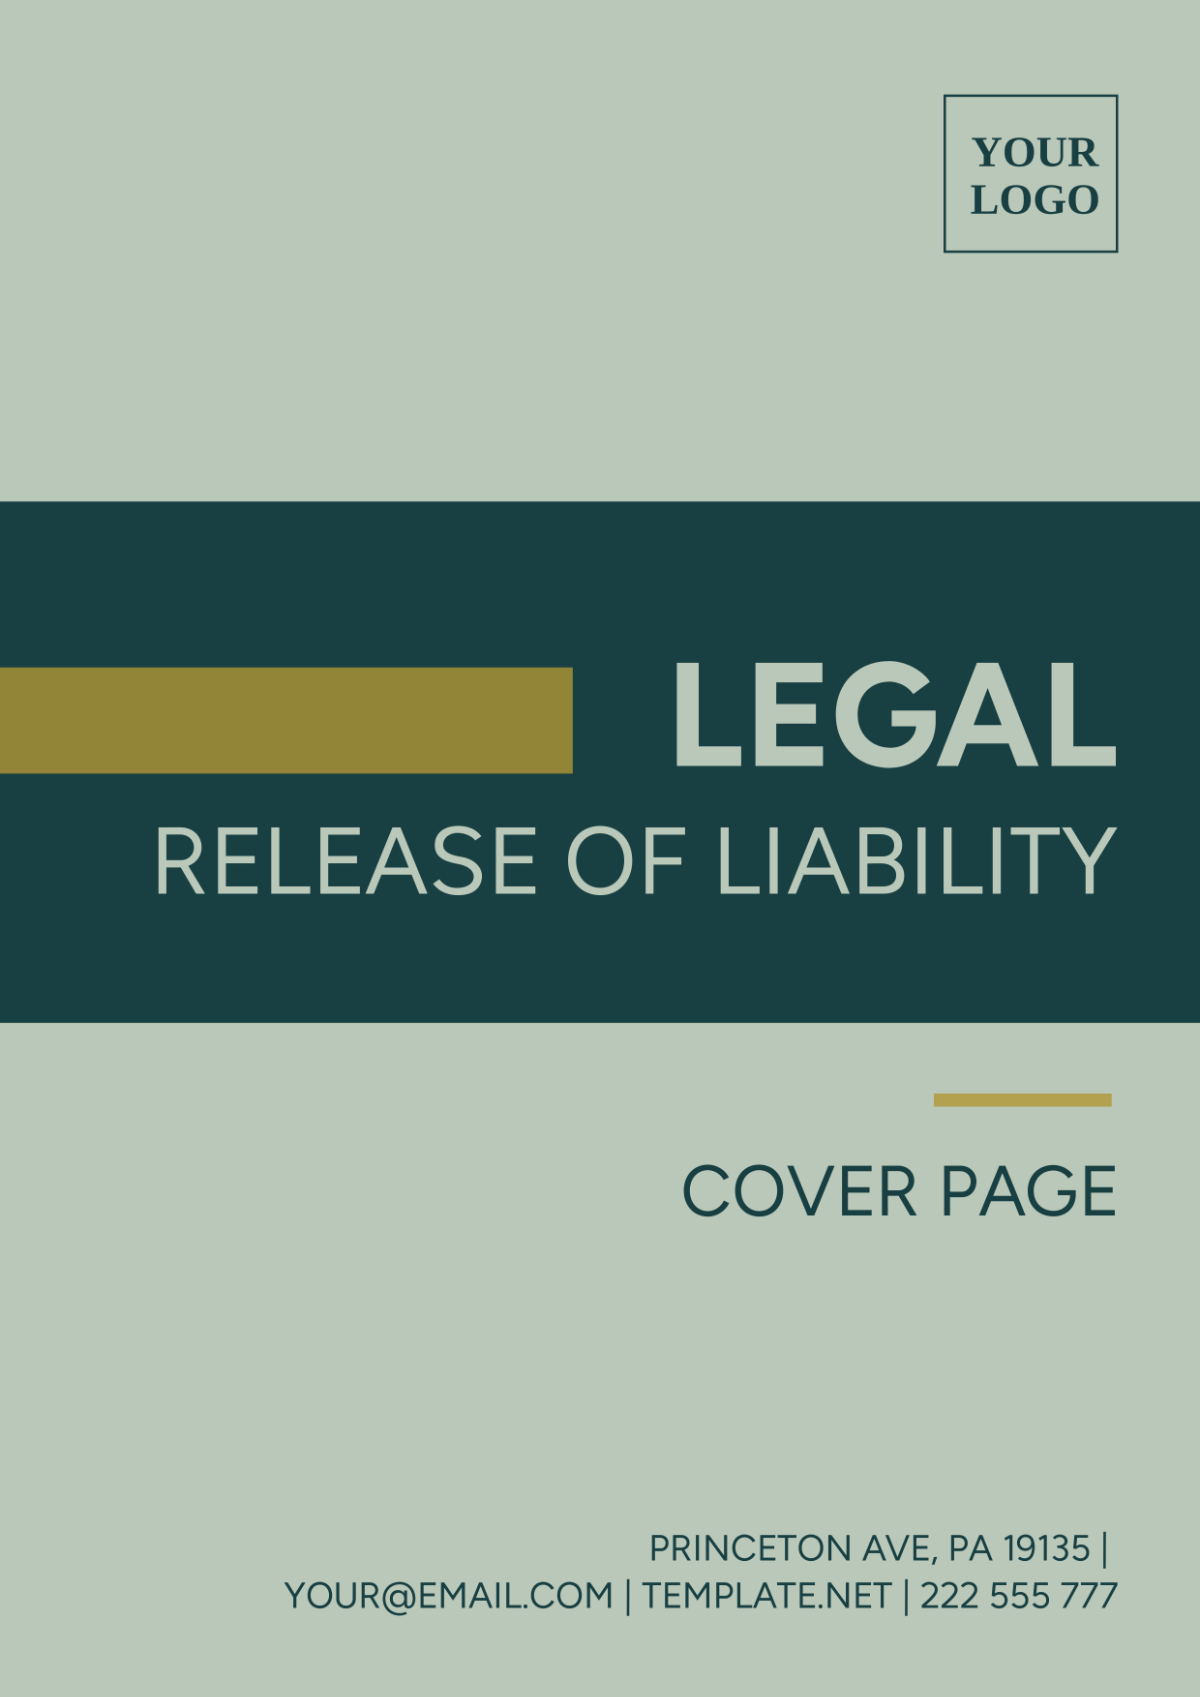 Legal Release of Liability Cover Page